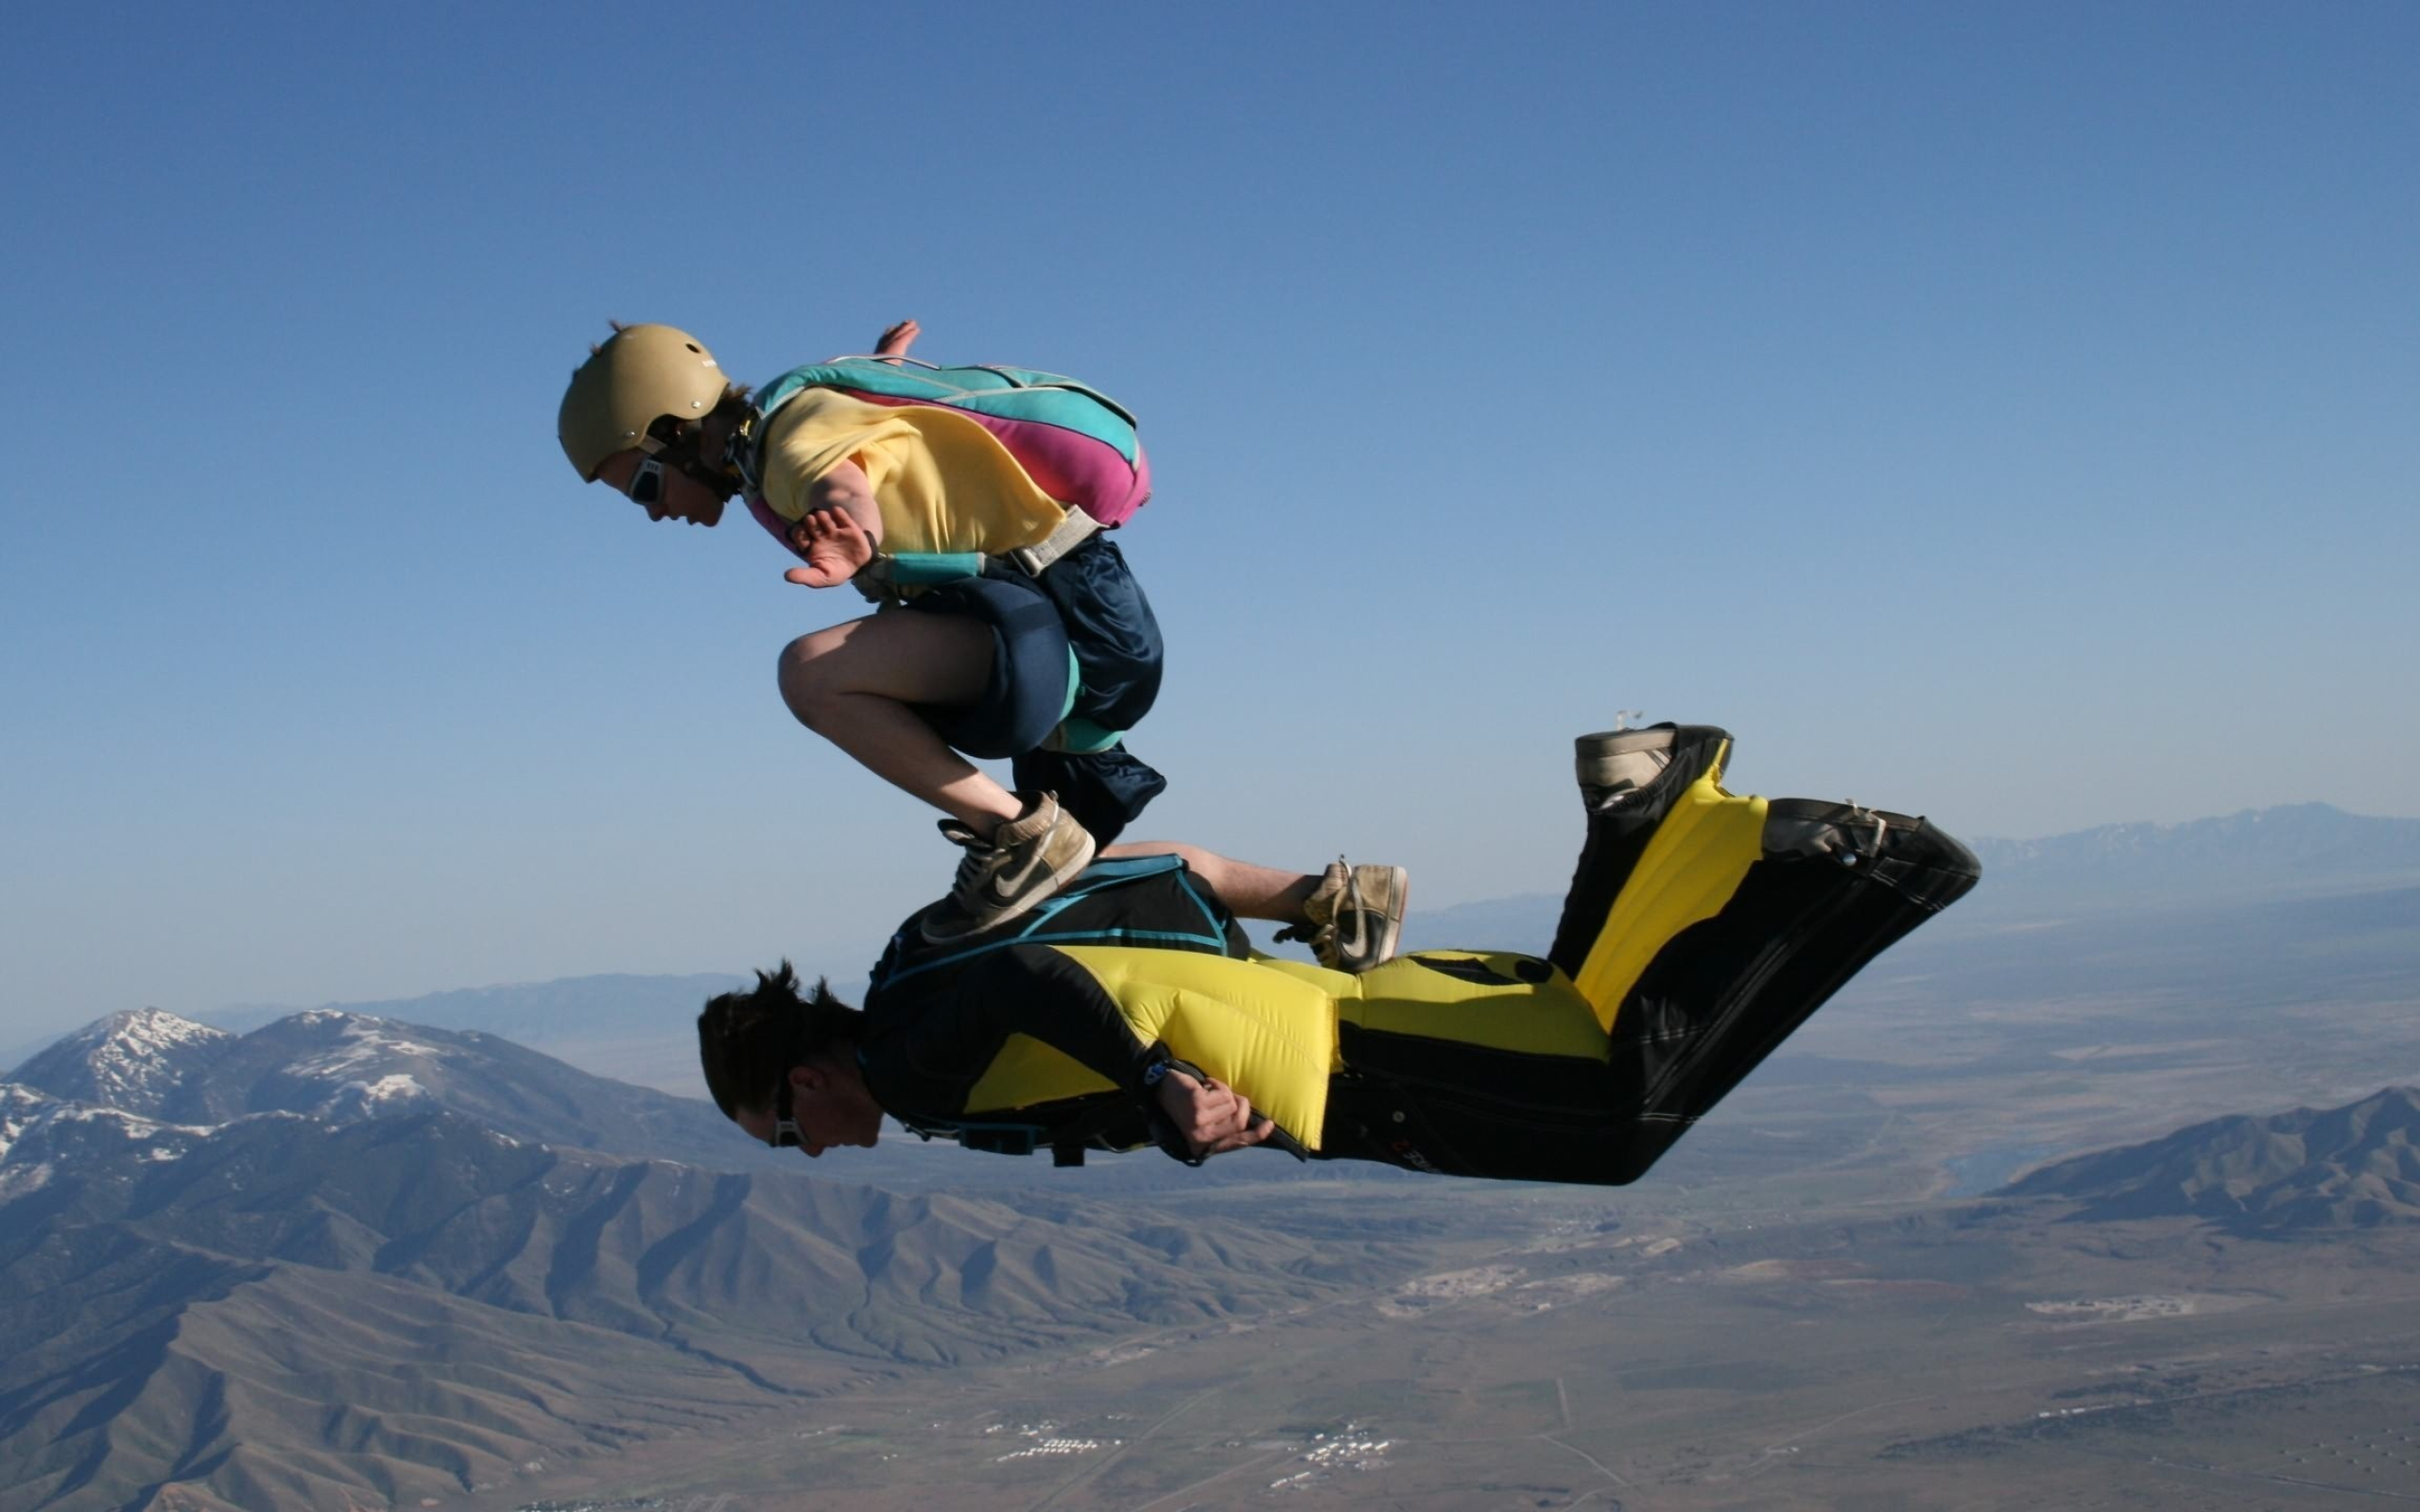 Wingsuit Flying: Tandem wingsuiting formation with a skydiver, Extreme sport performance. 2560x1600 HD Wallpaper.